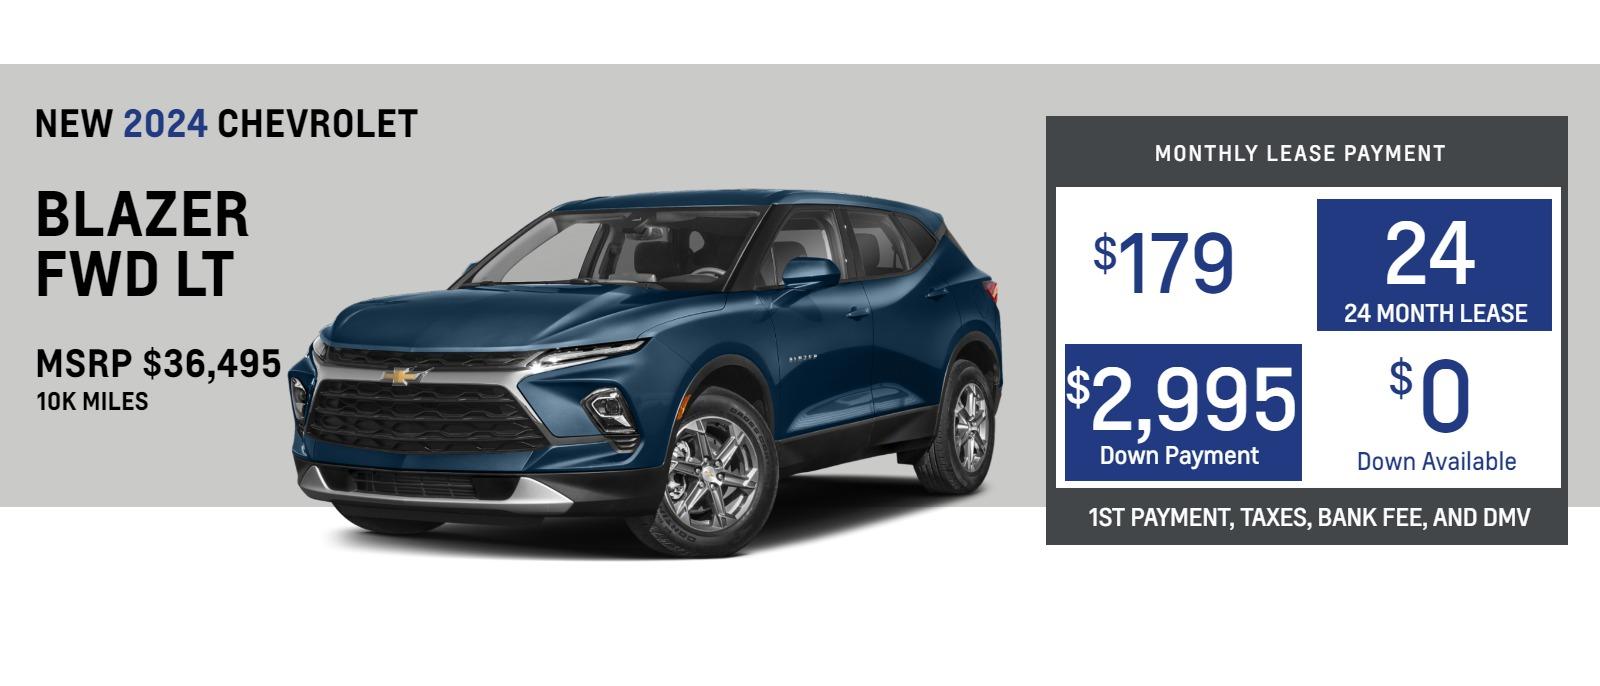 2024 Chevrolet Blazer FWD LT W/2LT
MSRP $36,495.
$179. month
10k
24 months
$2,995. down plus taxes, bank fee and DMV 
*includes all incentives